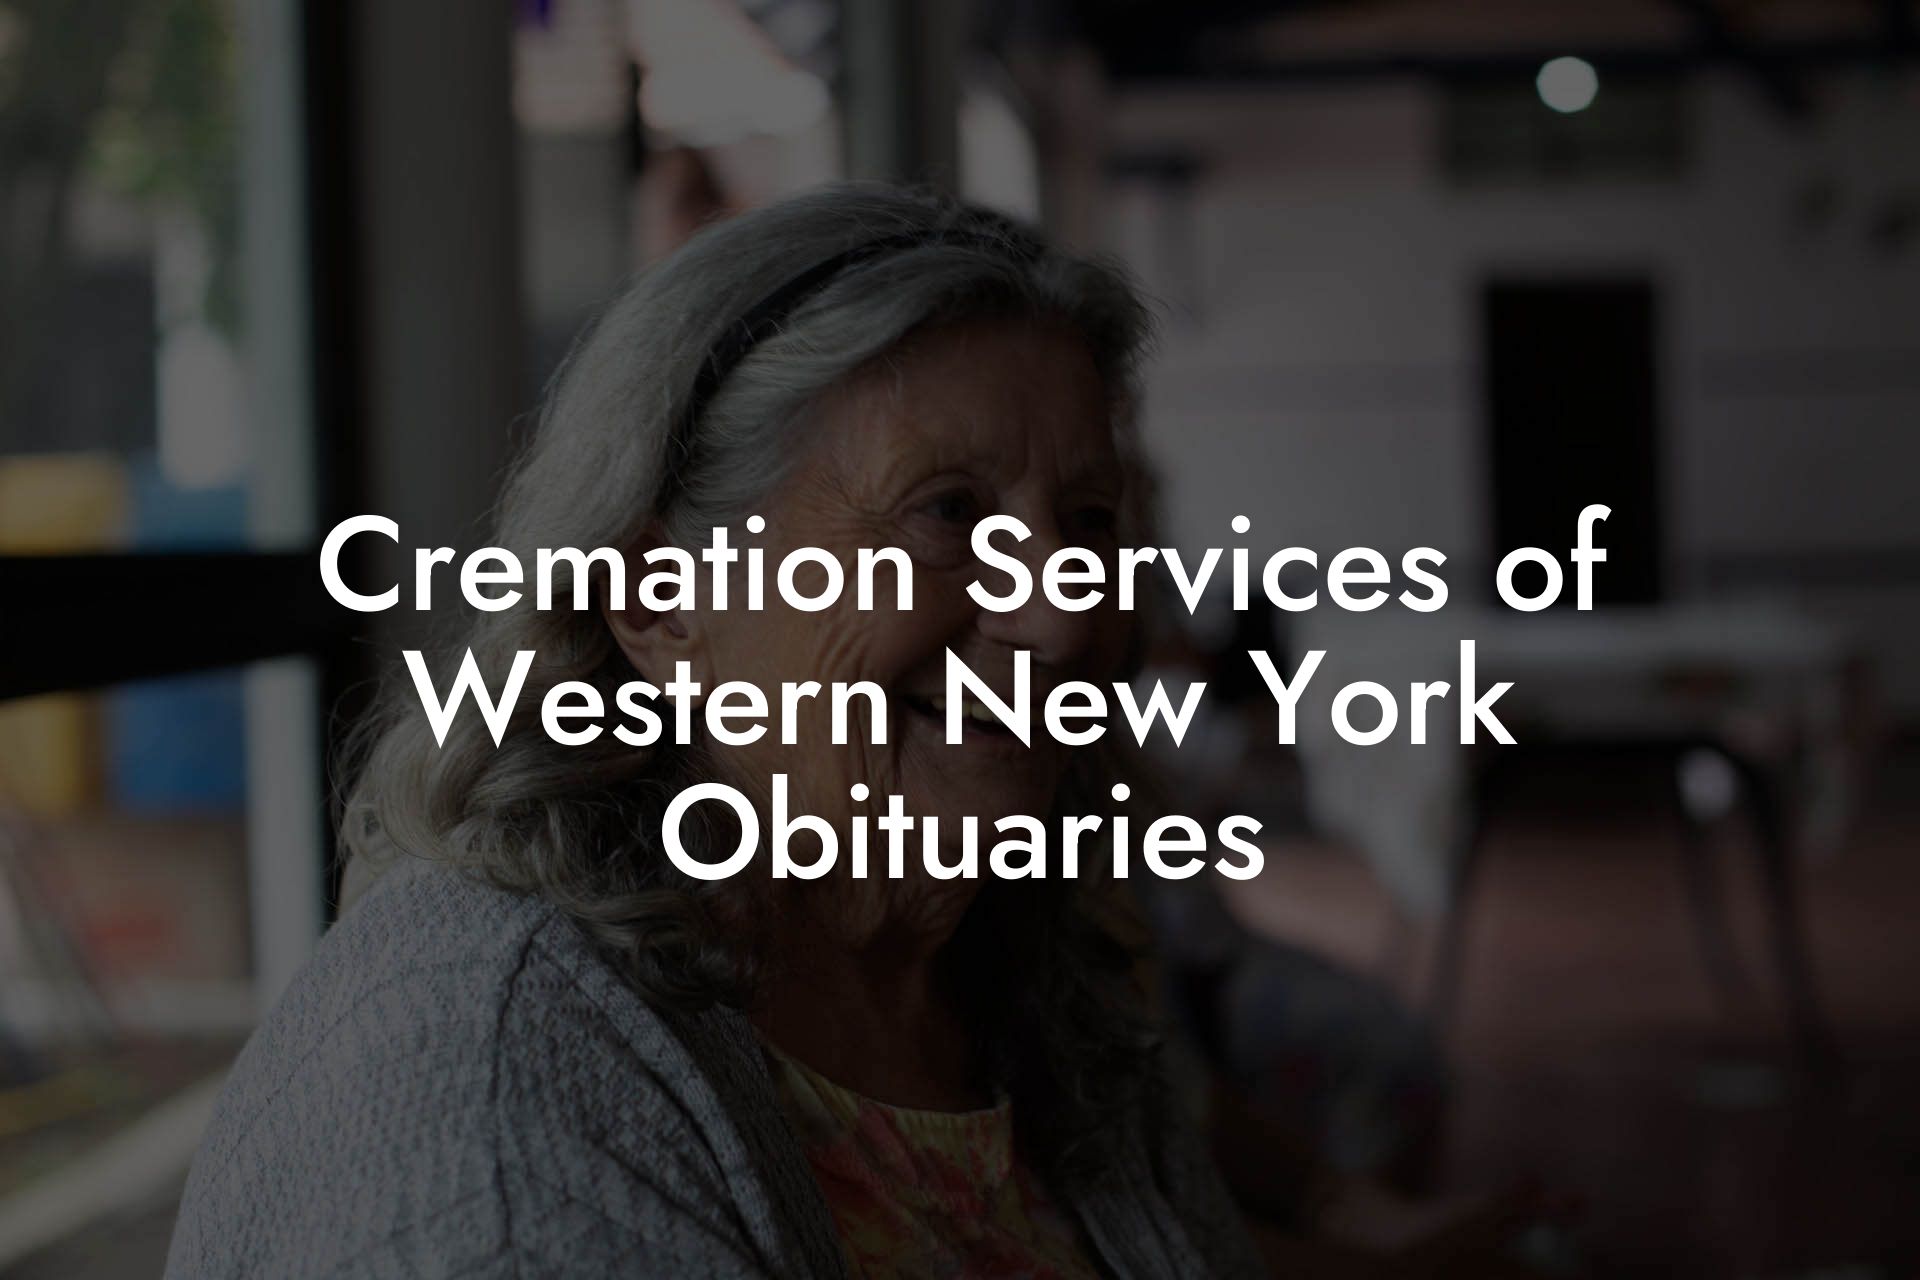 Cremation Services of Western New York Obituaries